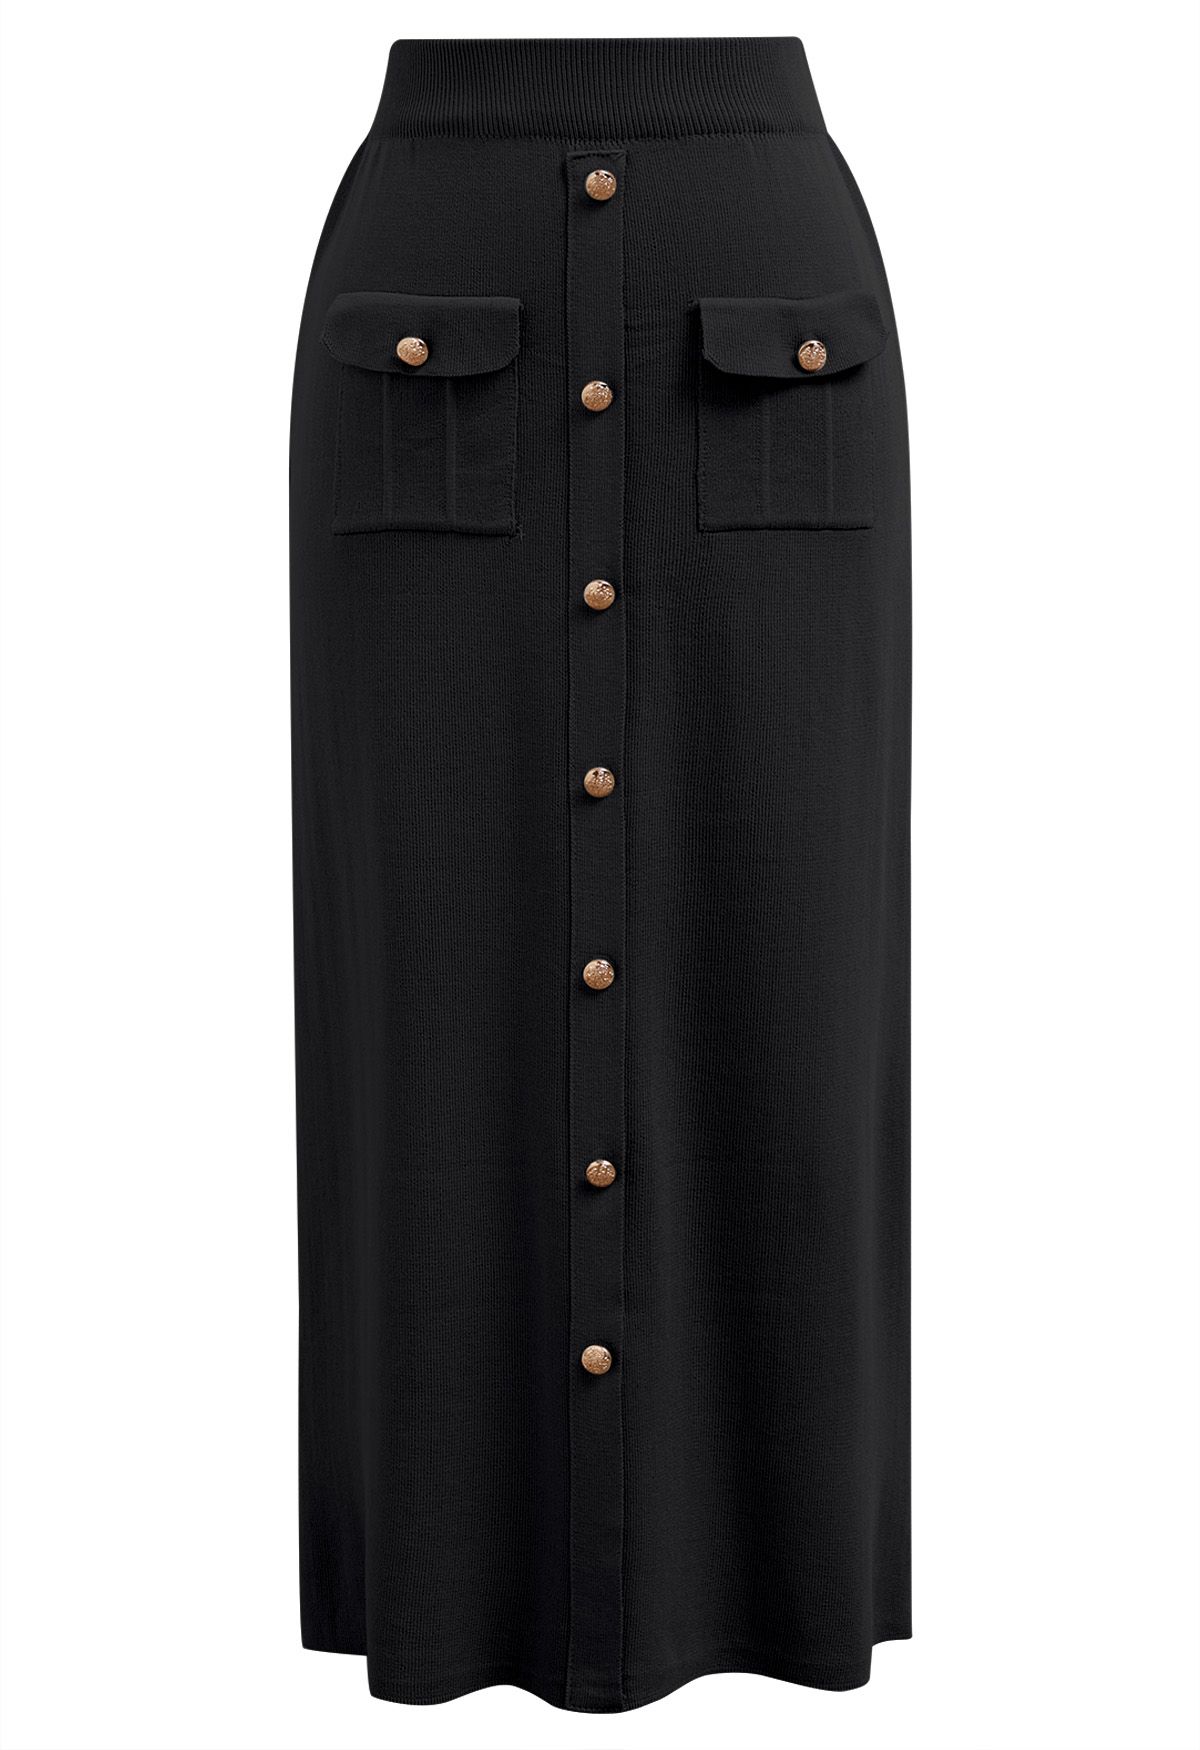 Standout Button Embellished Knit Top and Midi Skirt Set in Black